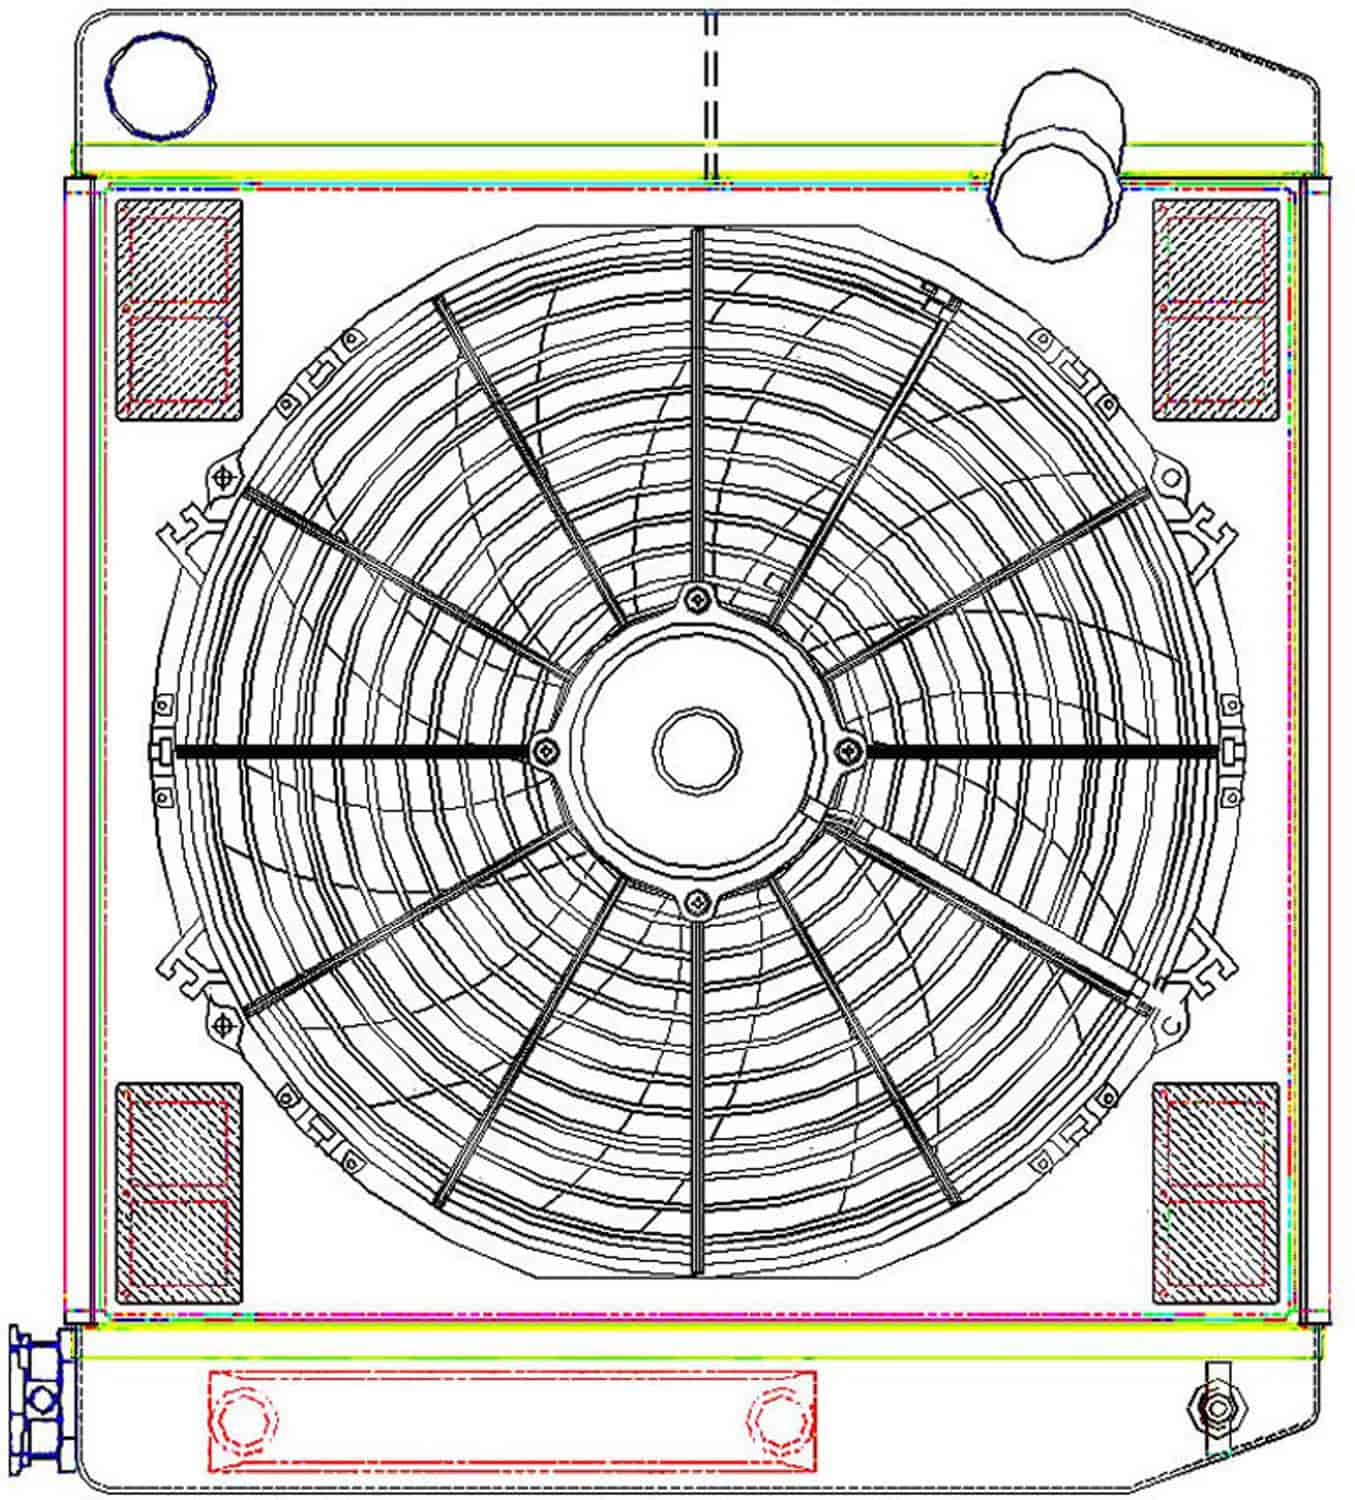 MegaCool ComboUnit Universal Fit Radiator and Fan Dual Pass Crossflow Design 22" x 19" with Transmission Cooler